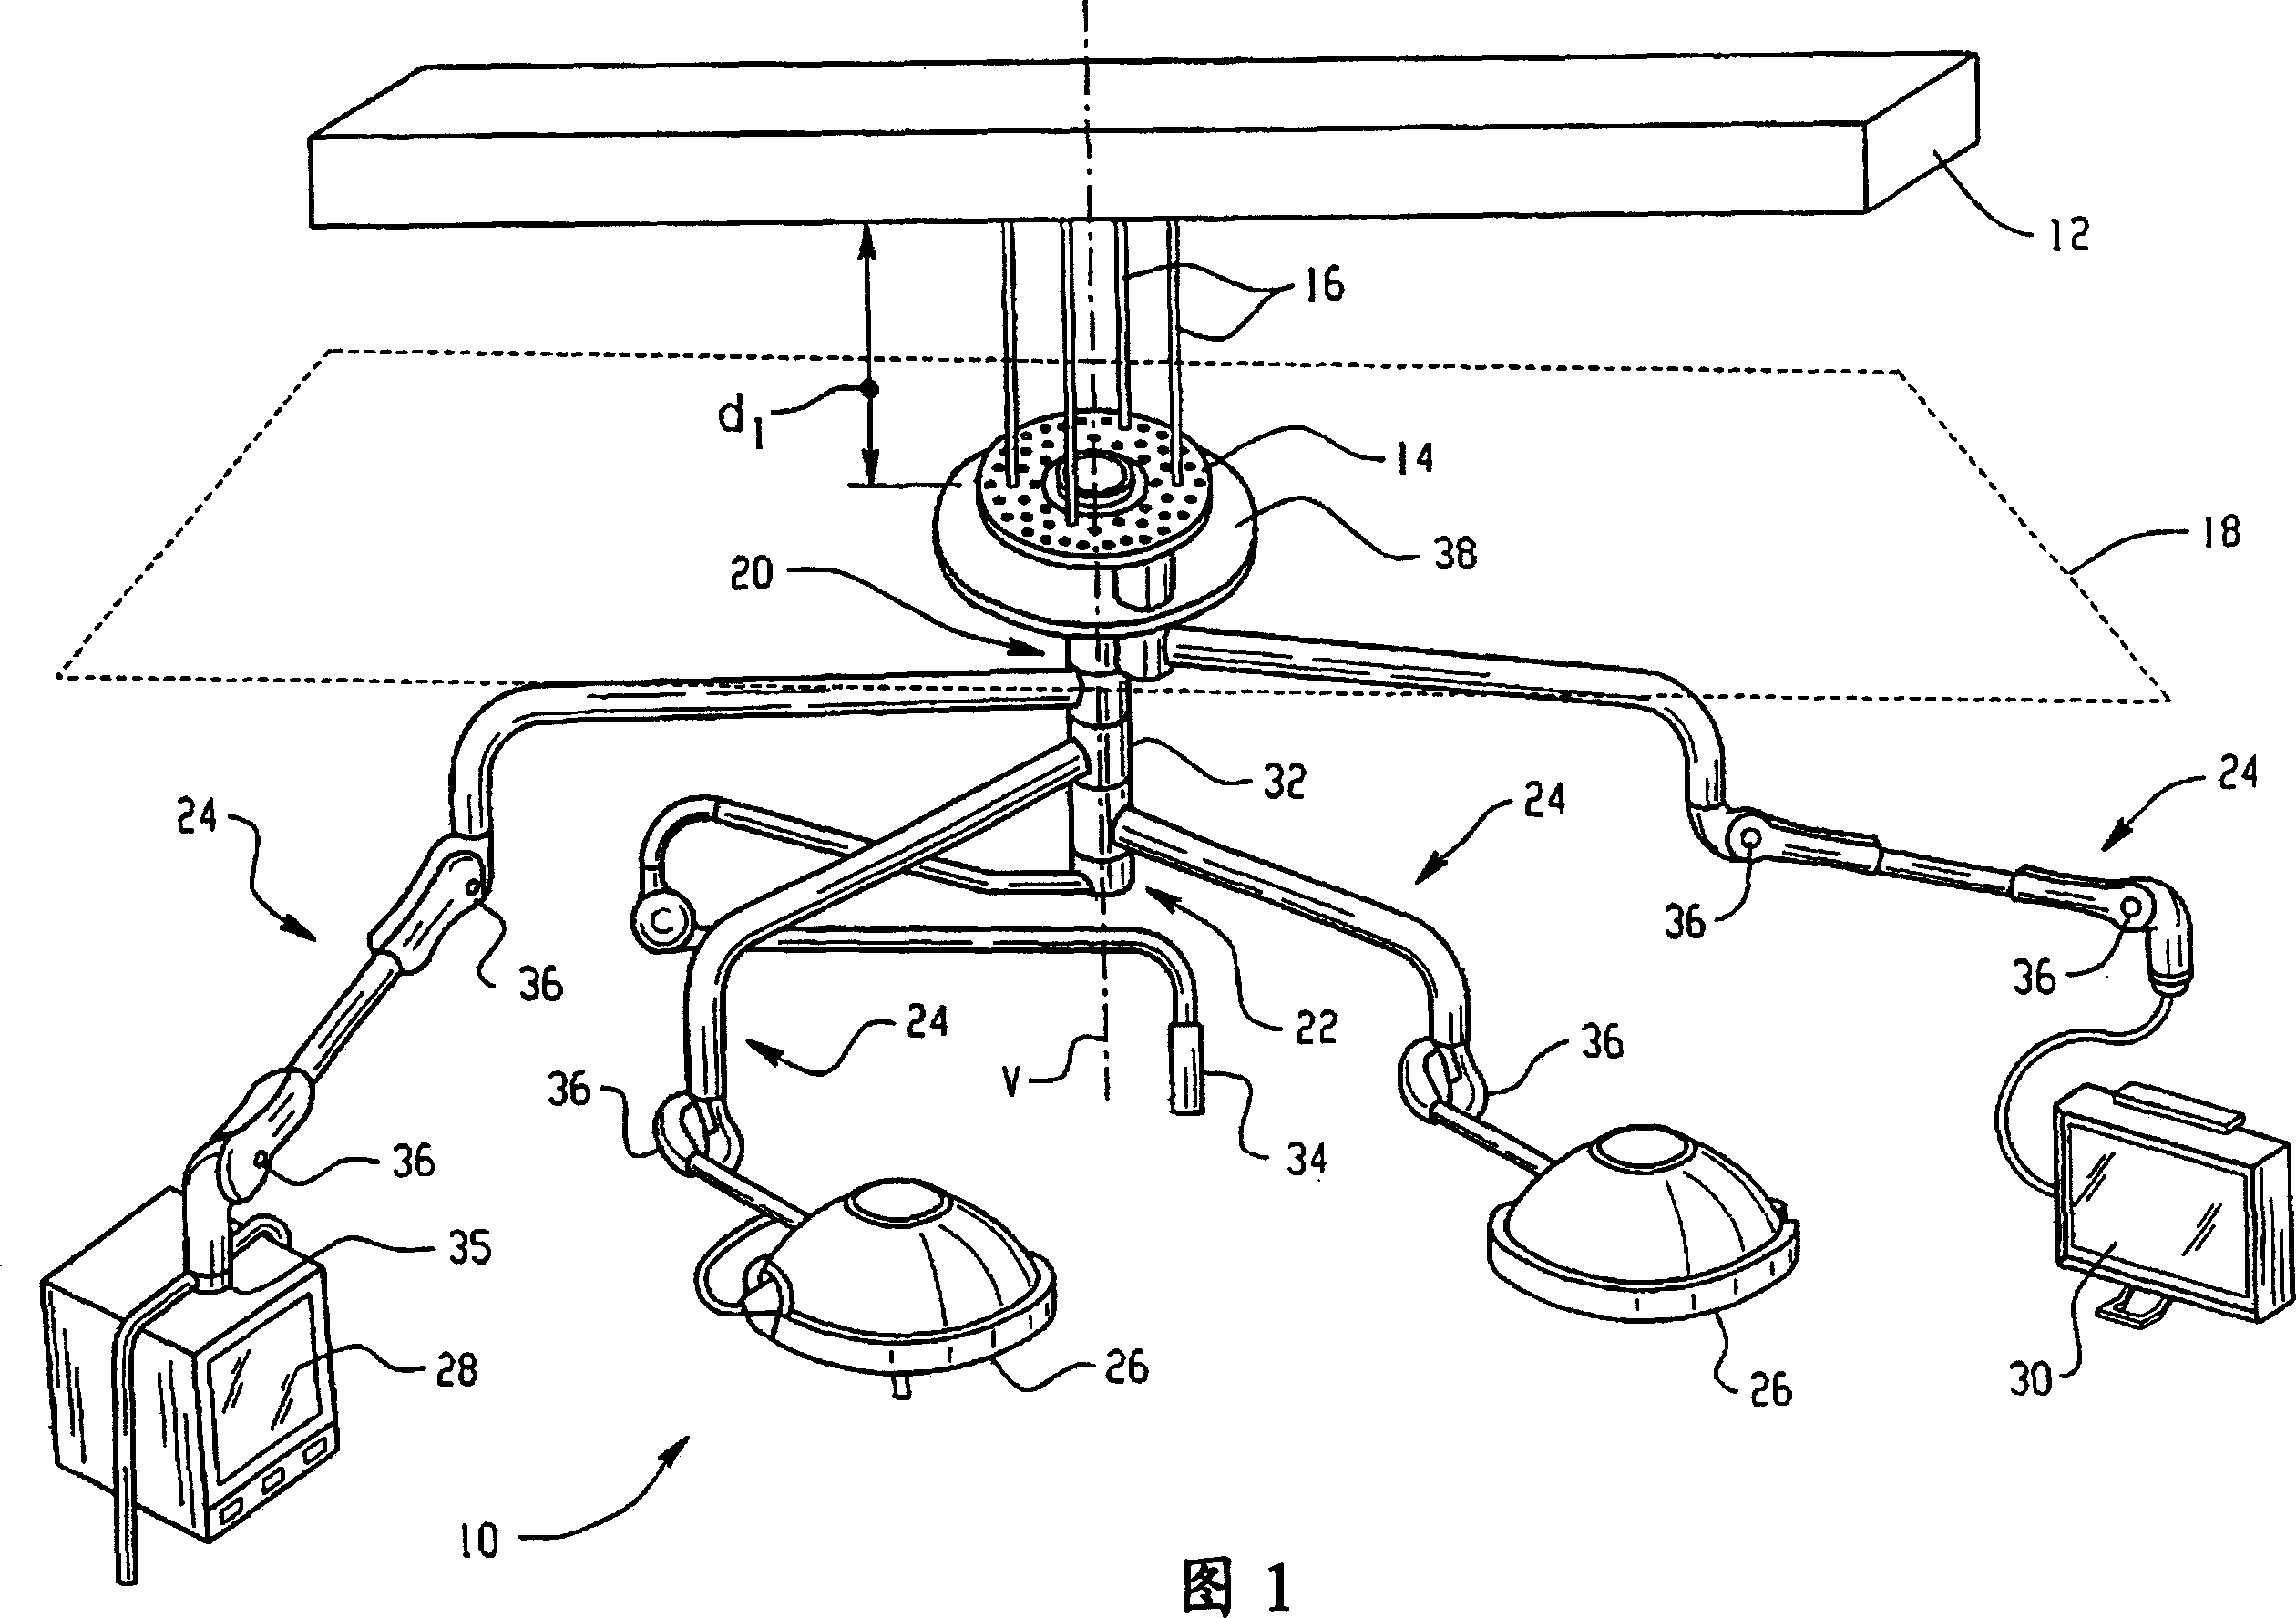 Surgical suspension system